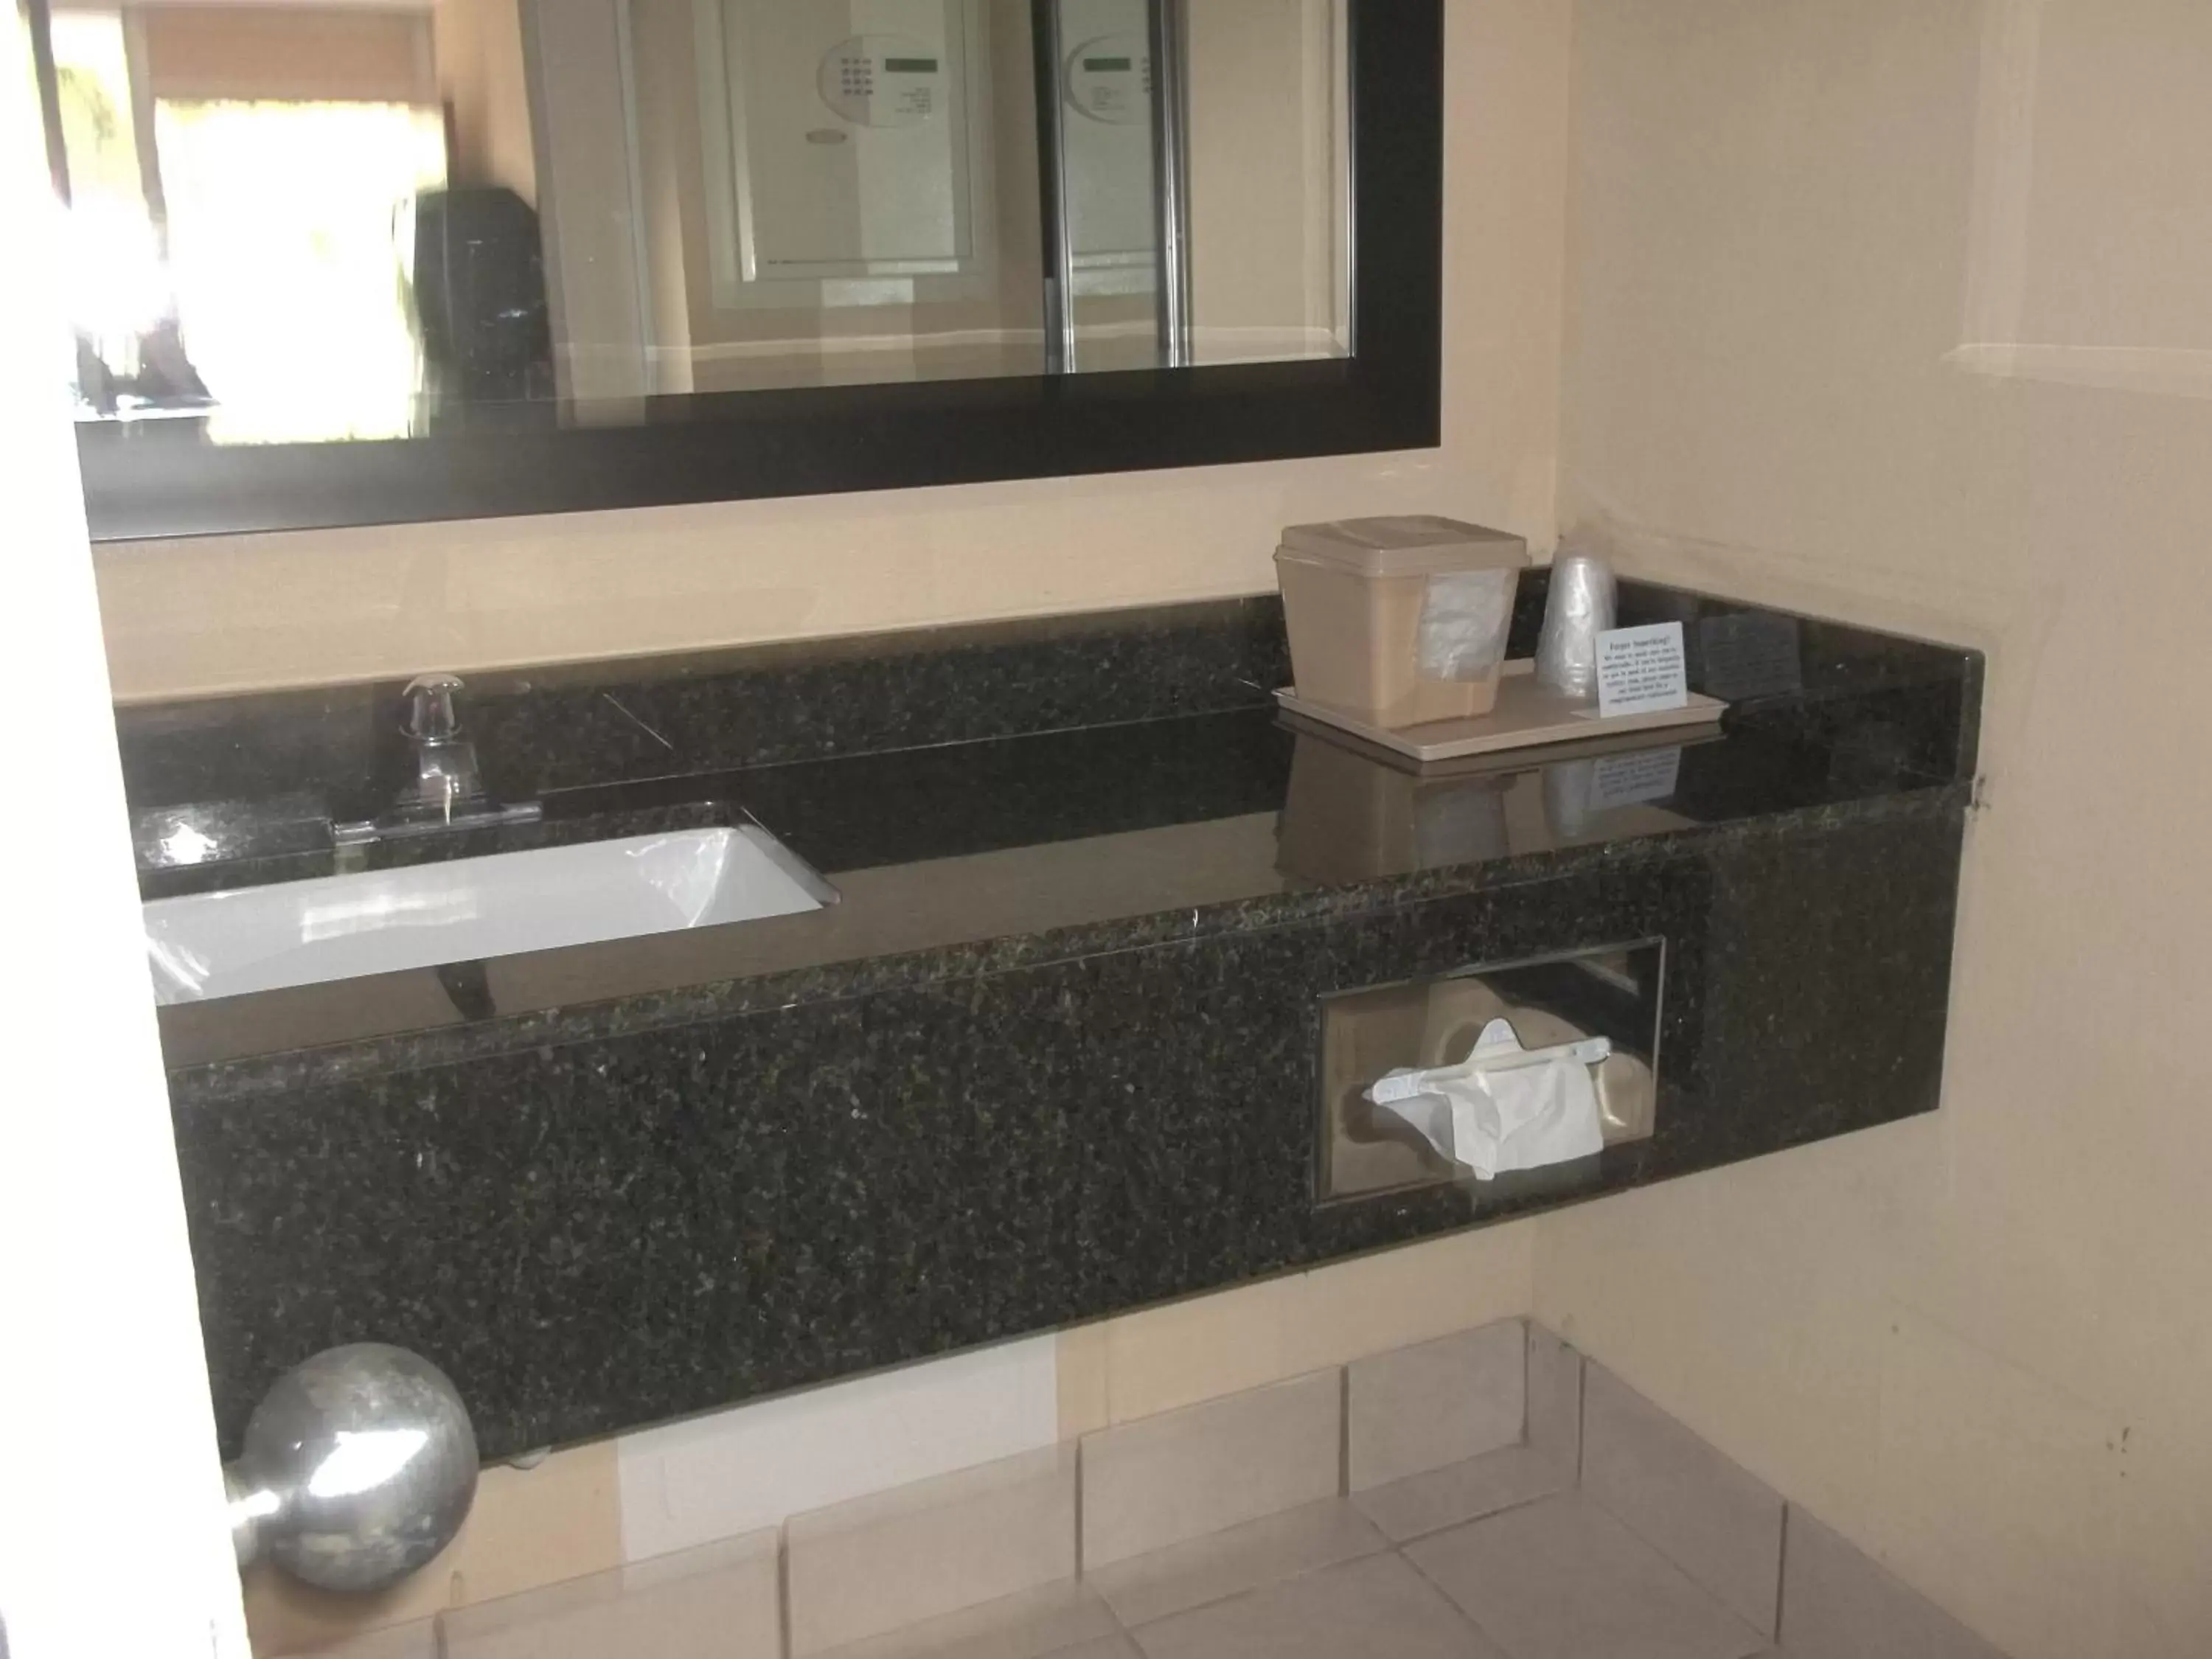 Photo of the whole room, Bathroom in Days Inn by Wyndham Fort Lauderdale Airport Cruise Port